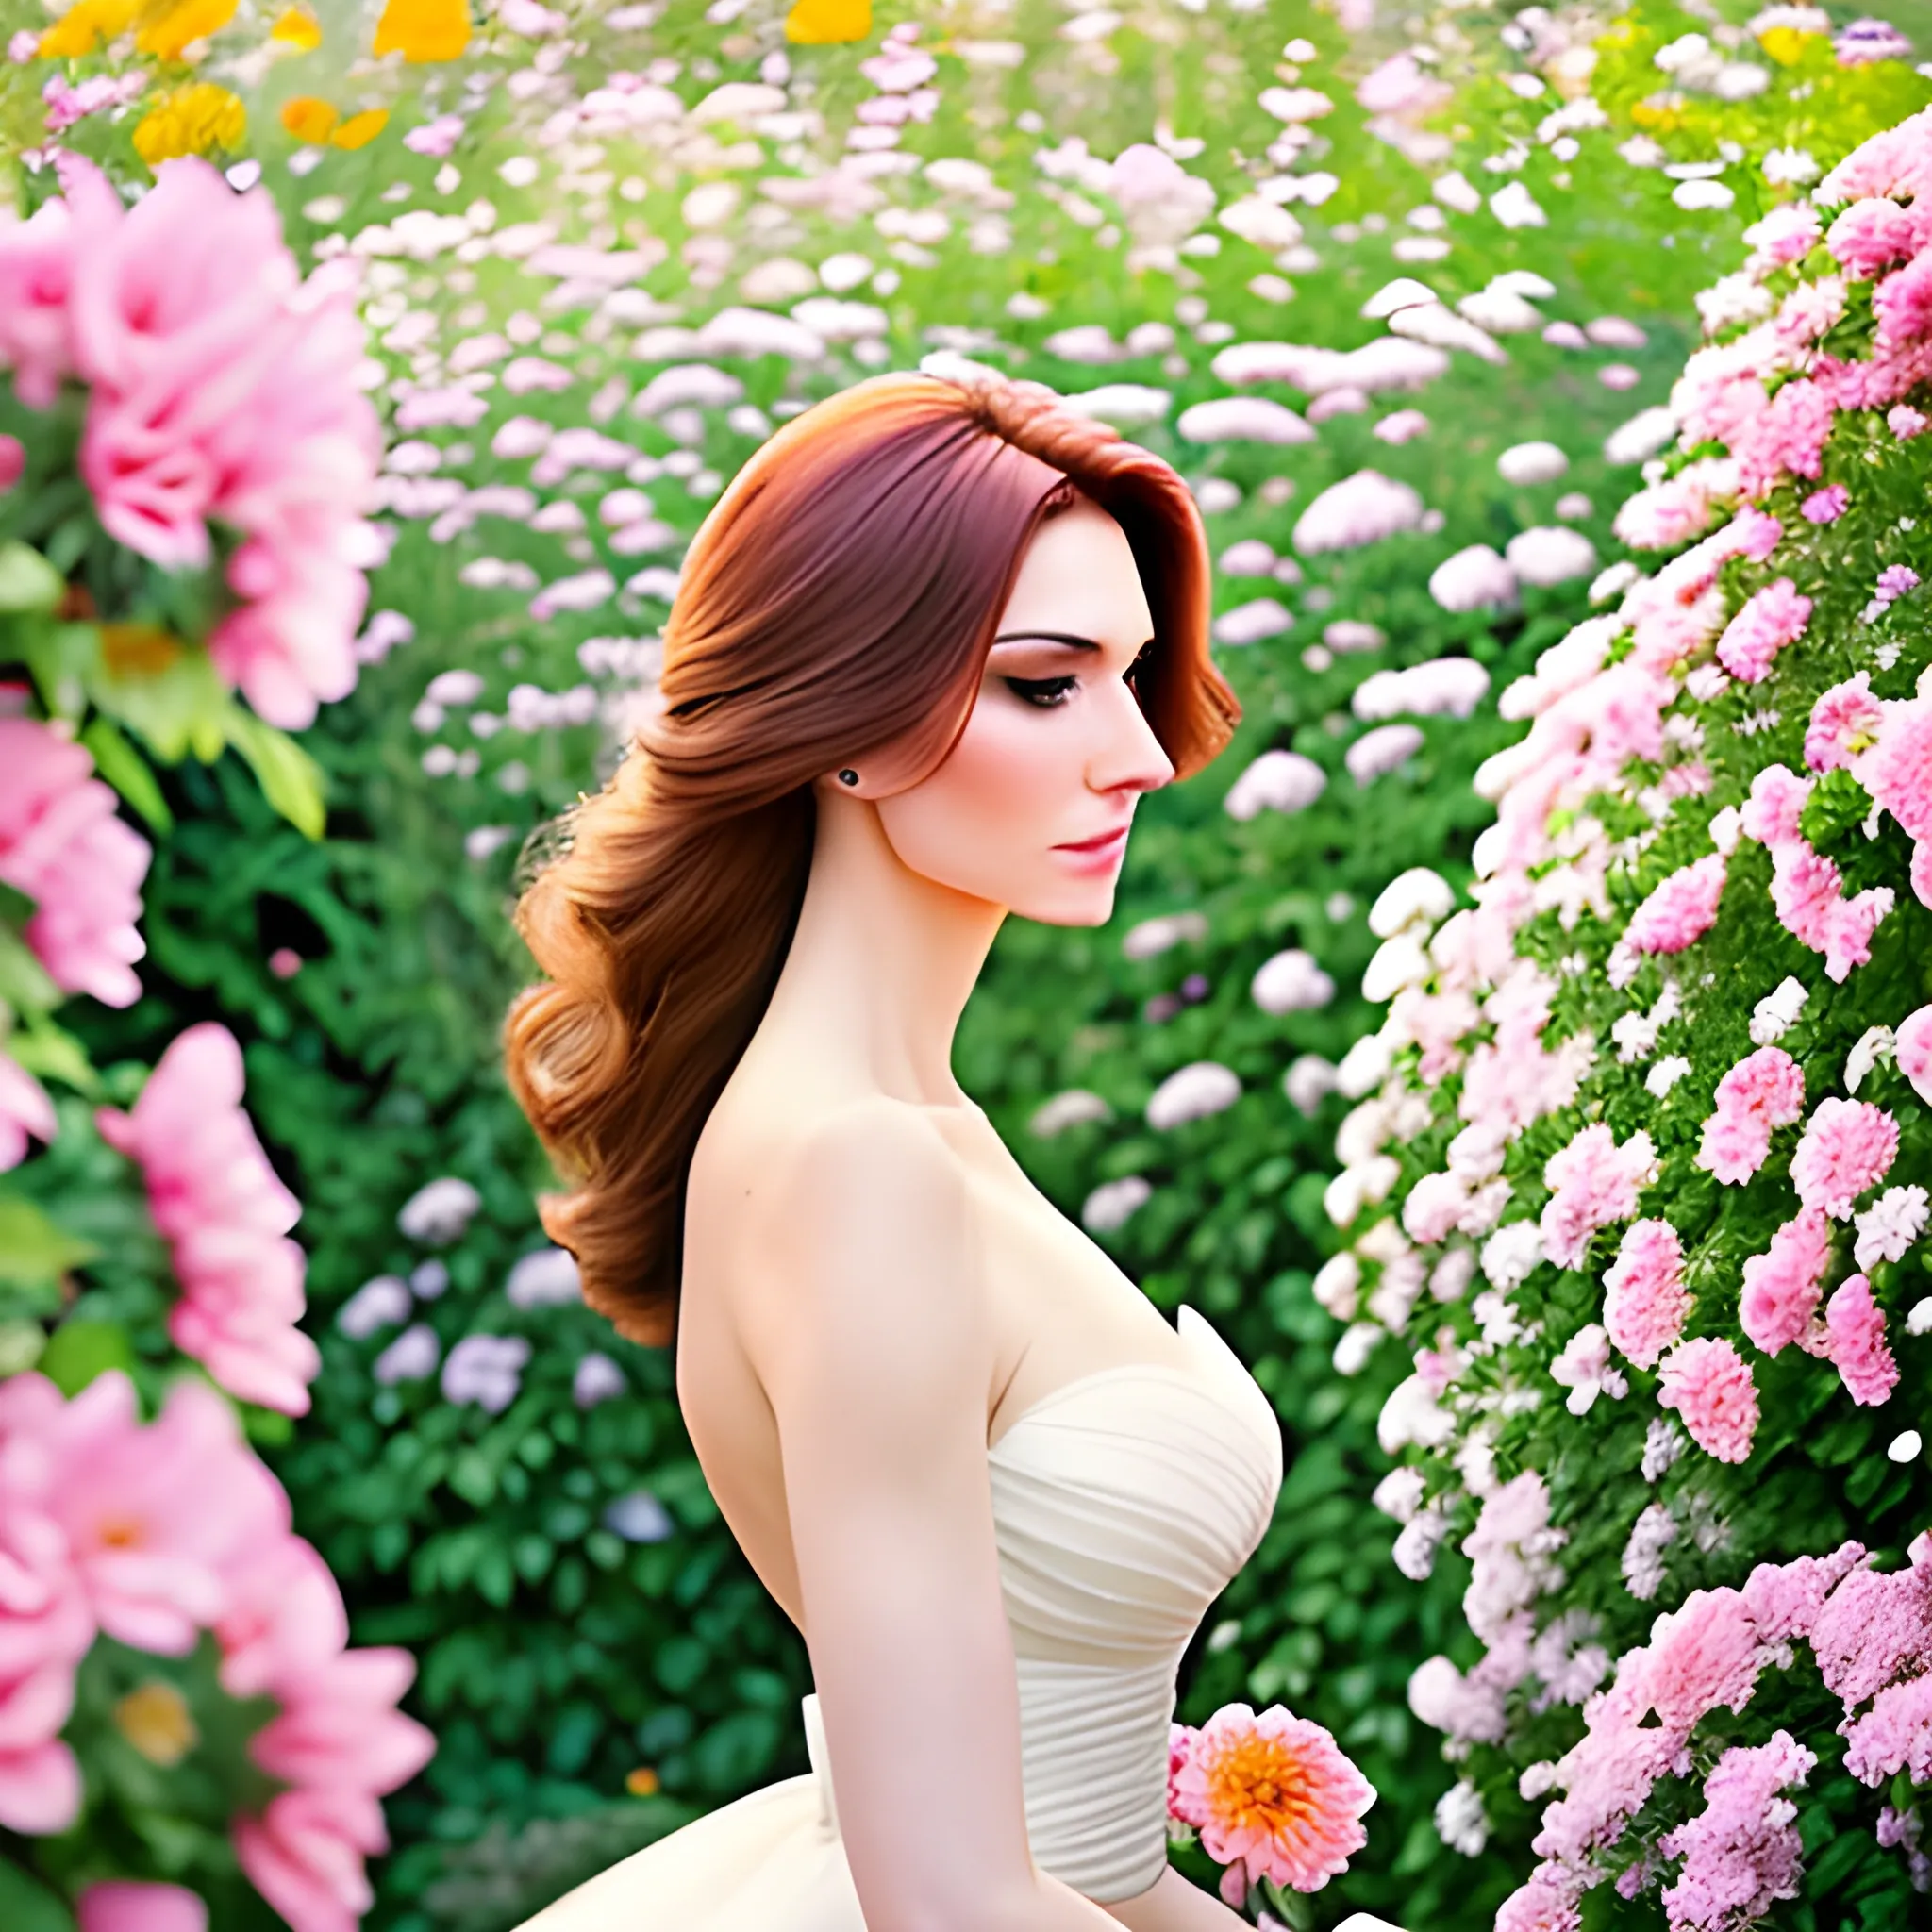 Photographing the girl among a garden of flowers, her ethereal beauty contrasting with the blooms. Bright yet diffuse morning light softly illuminates her fair skin and flowing dress. Shooting from a low angle emphasizes her delicate bone structure and lifts her graceful profile.